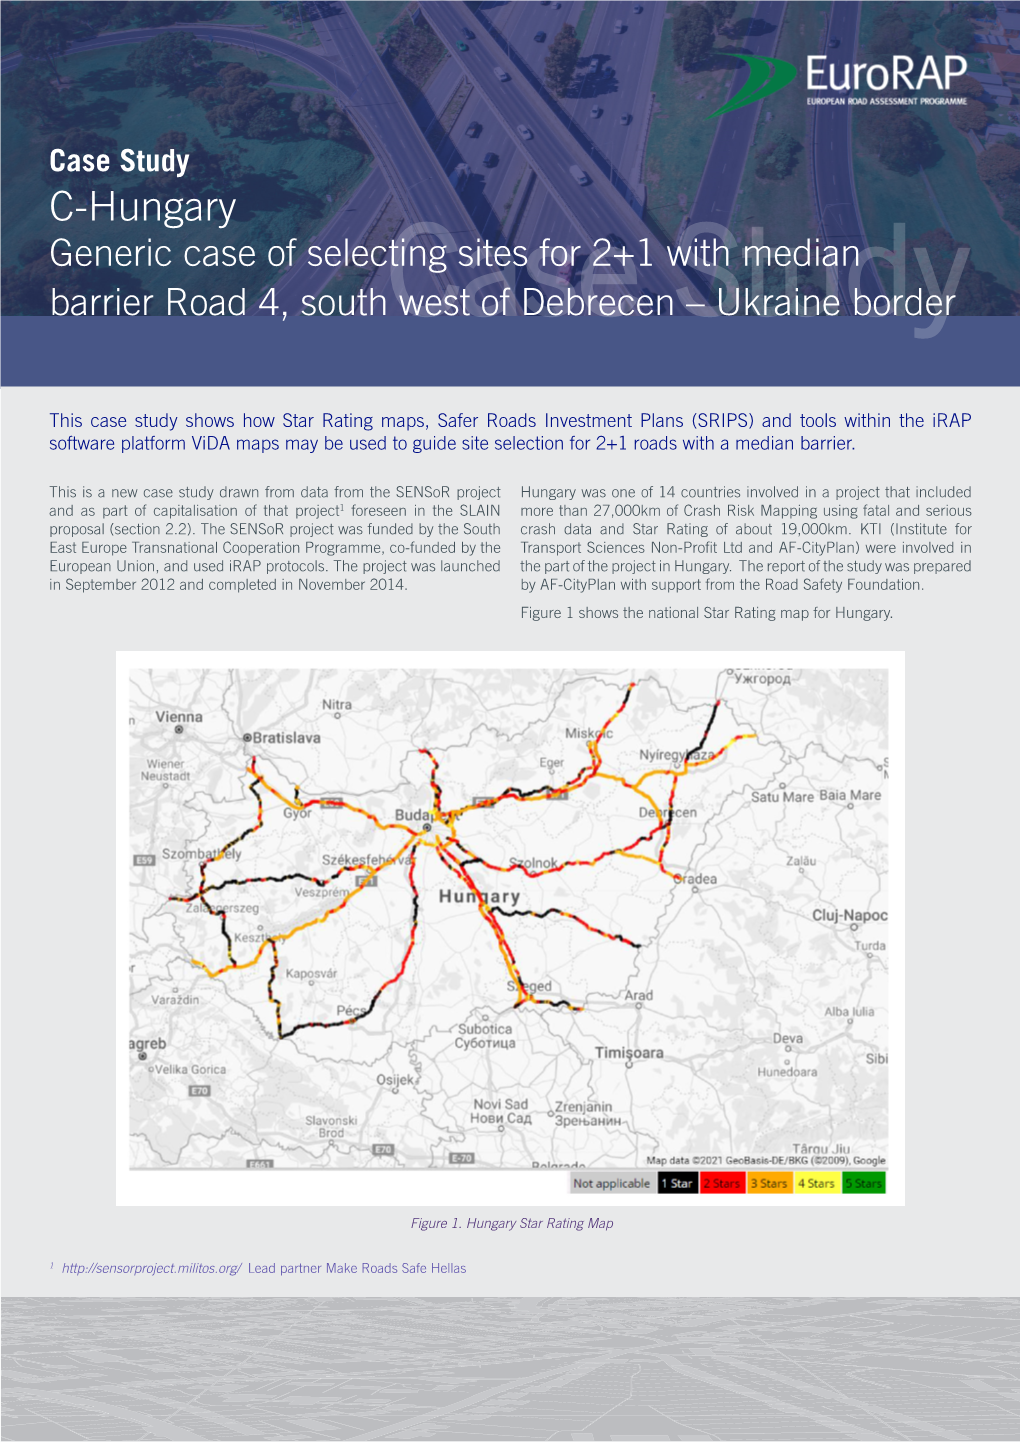 C-Hungary Generic Case of Selecting Sites for 2+1 with Median Barrier Road 4, Southcase West of Debrecen Study – Ukraine Border